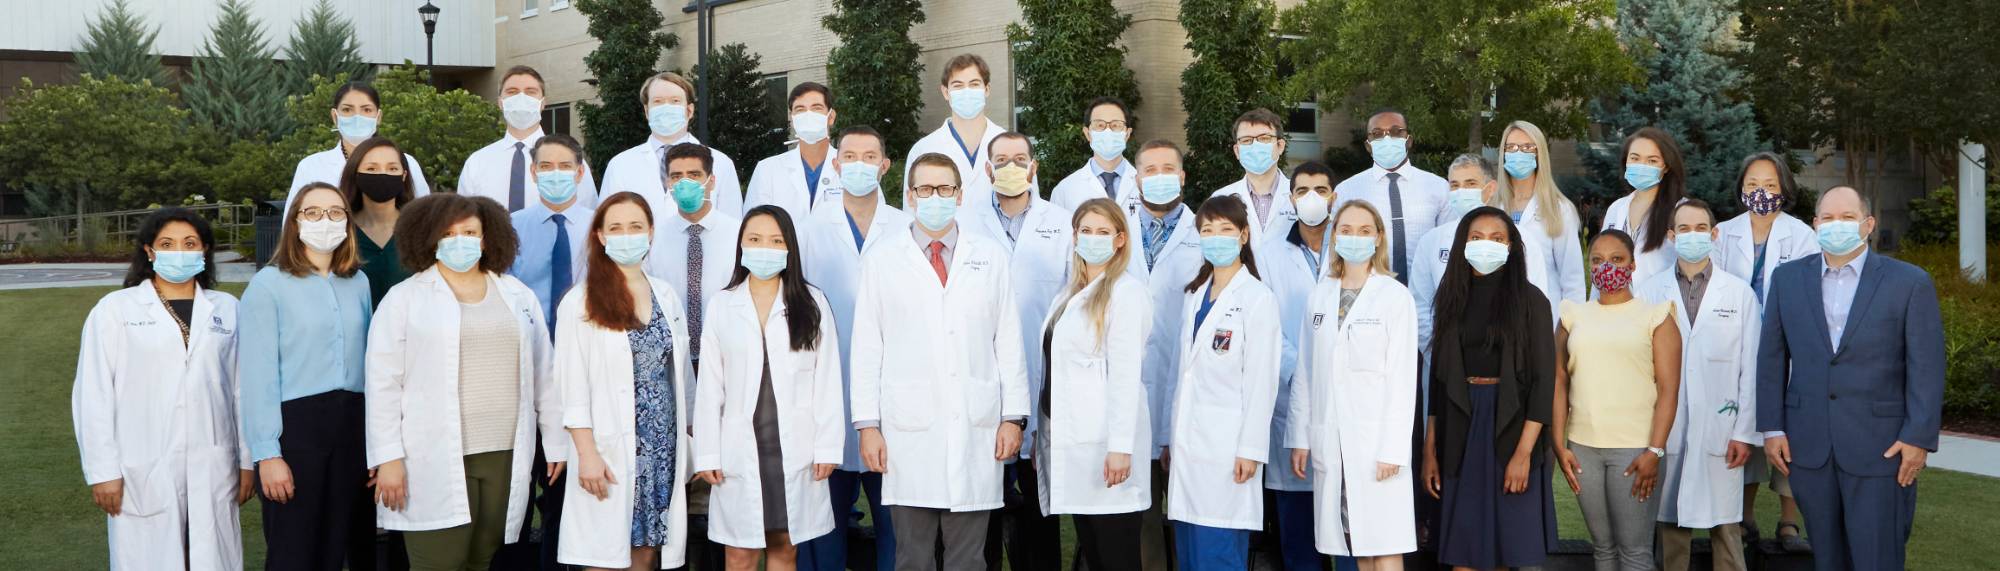 General Surgery Residents